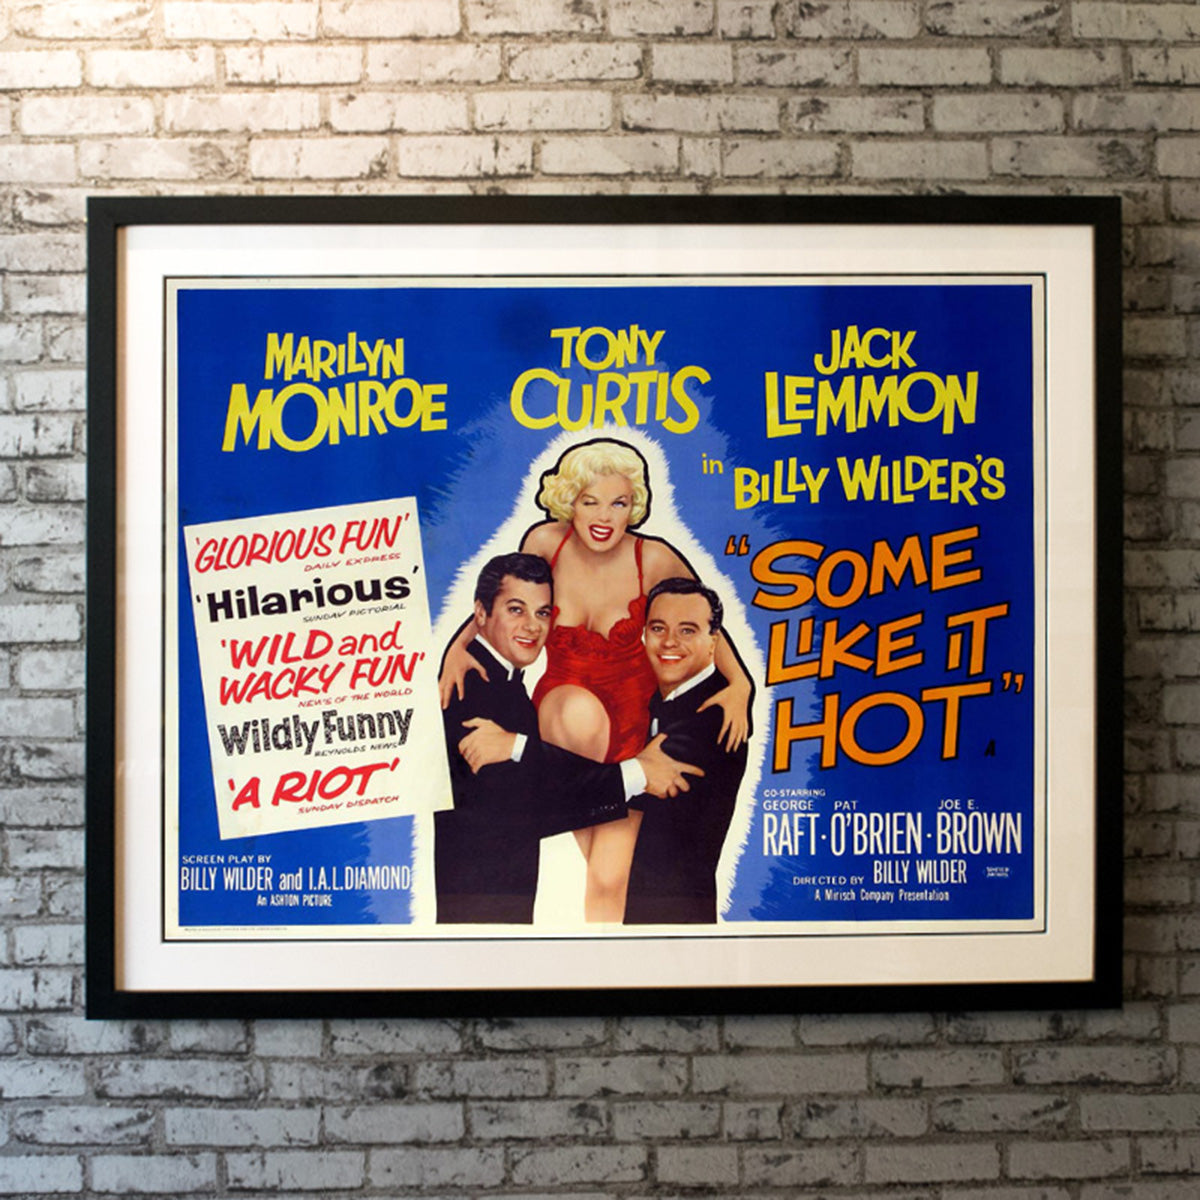 Original Movie Poster of Some Like It Hot (1959)